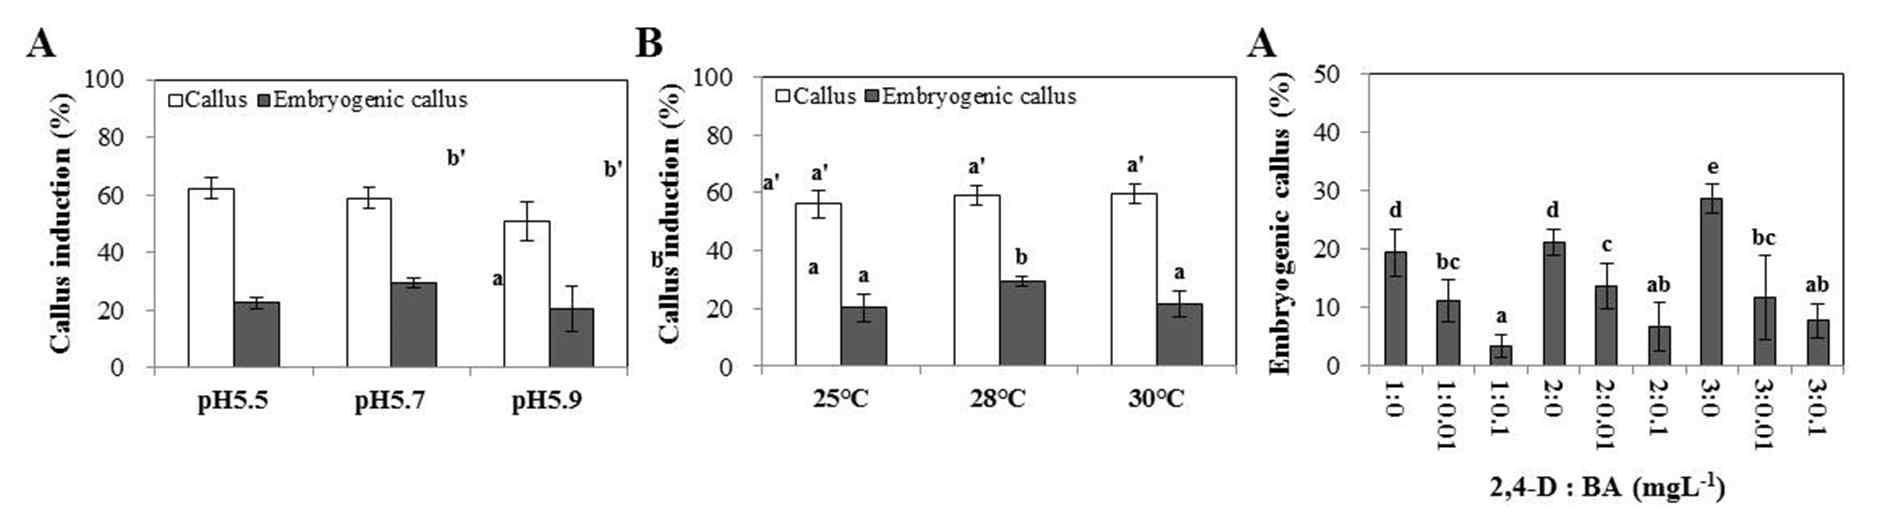 Effects of pH, temperature, and combinations of 2,4-D and BA on callus induction or embryogenic callus induction. (A) pH 효과 조사 결과. (B) 온도 효과 조사 결과. (C) 2,4-D와 BA 조합 (2,4-D : BA = 1~3: 0~0.1 mg/L) 효과 조사 결과.